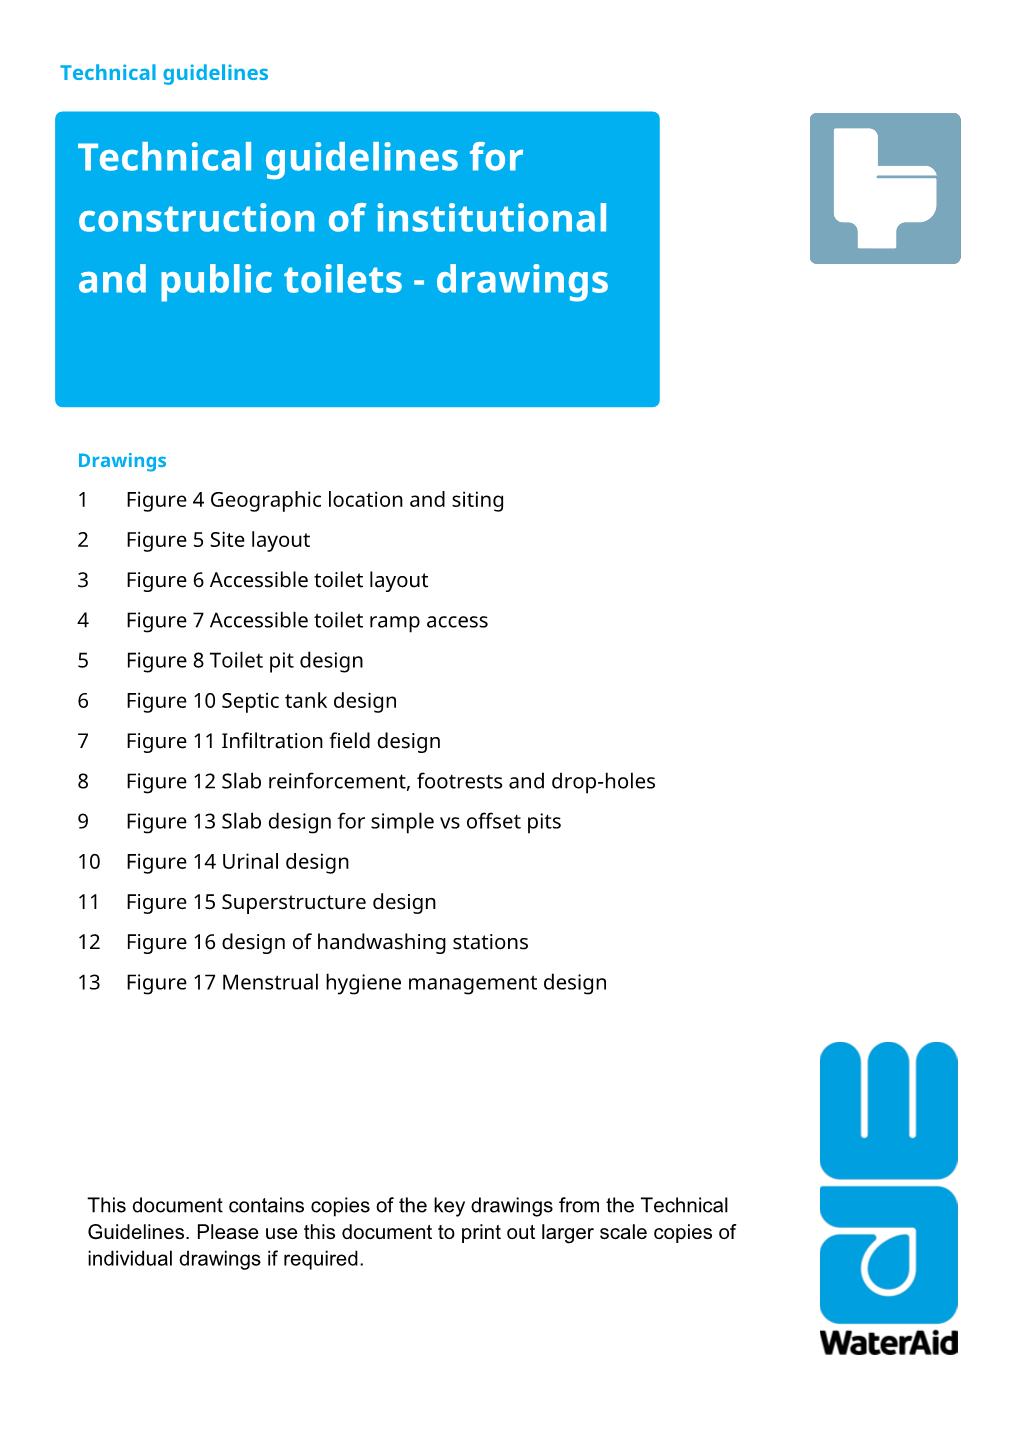 Technical Guidelines for Construction of Institutional and Public Toilets